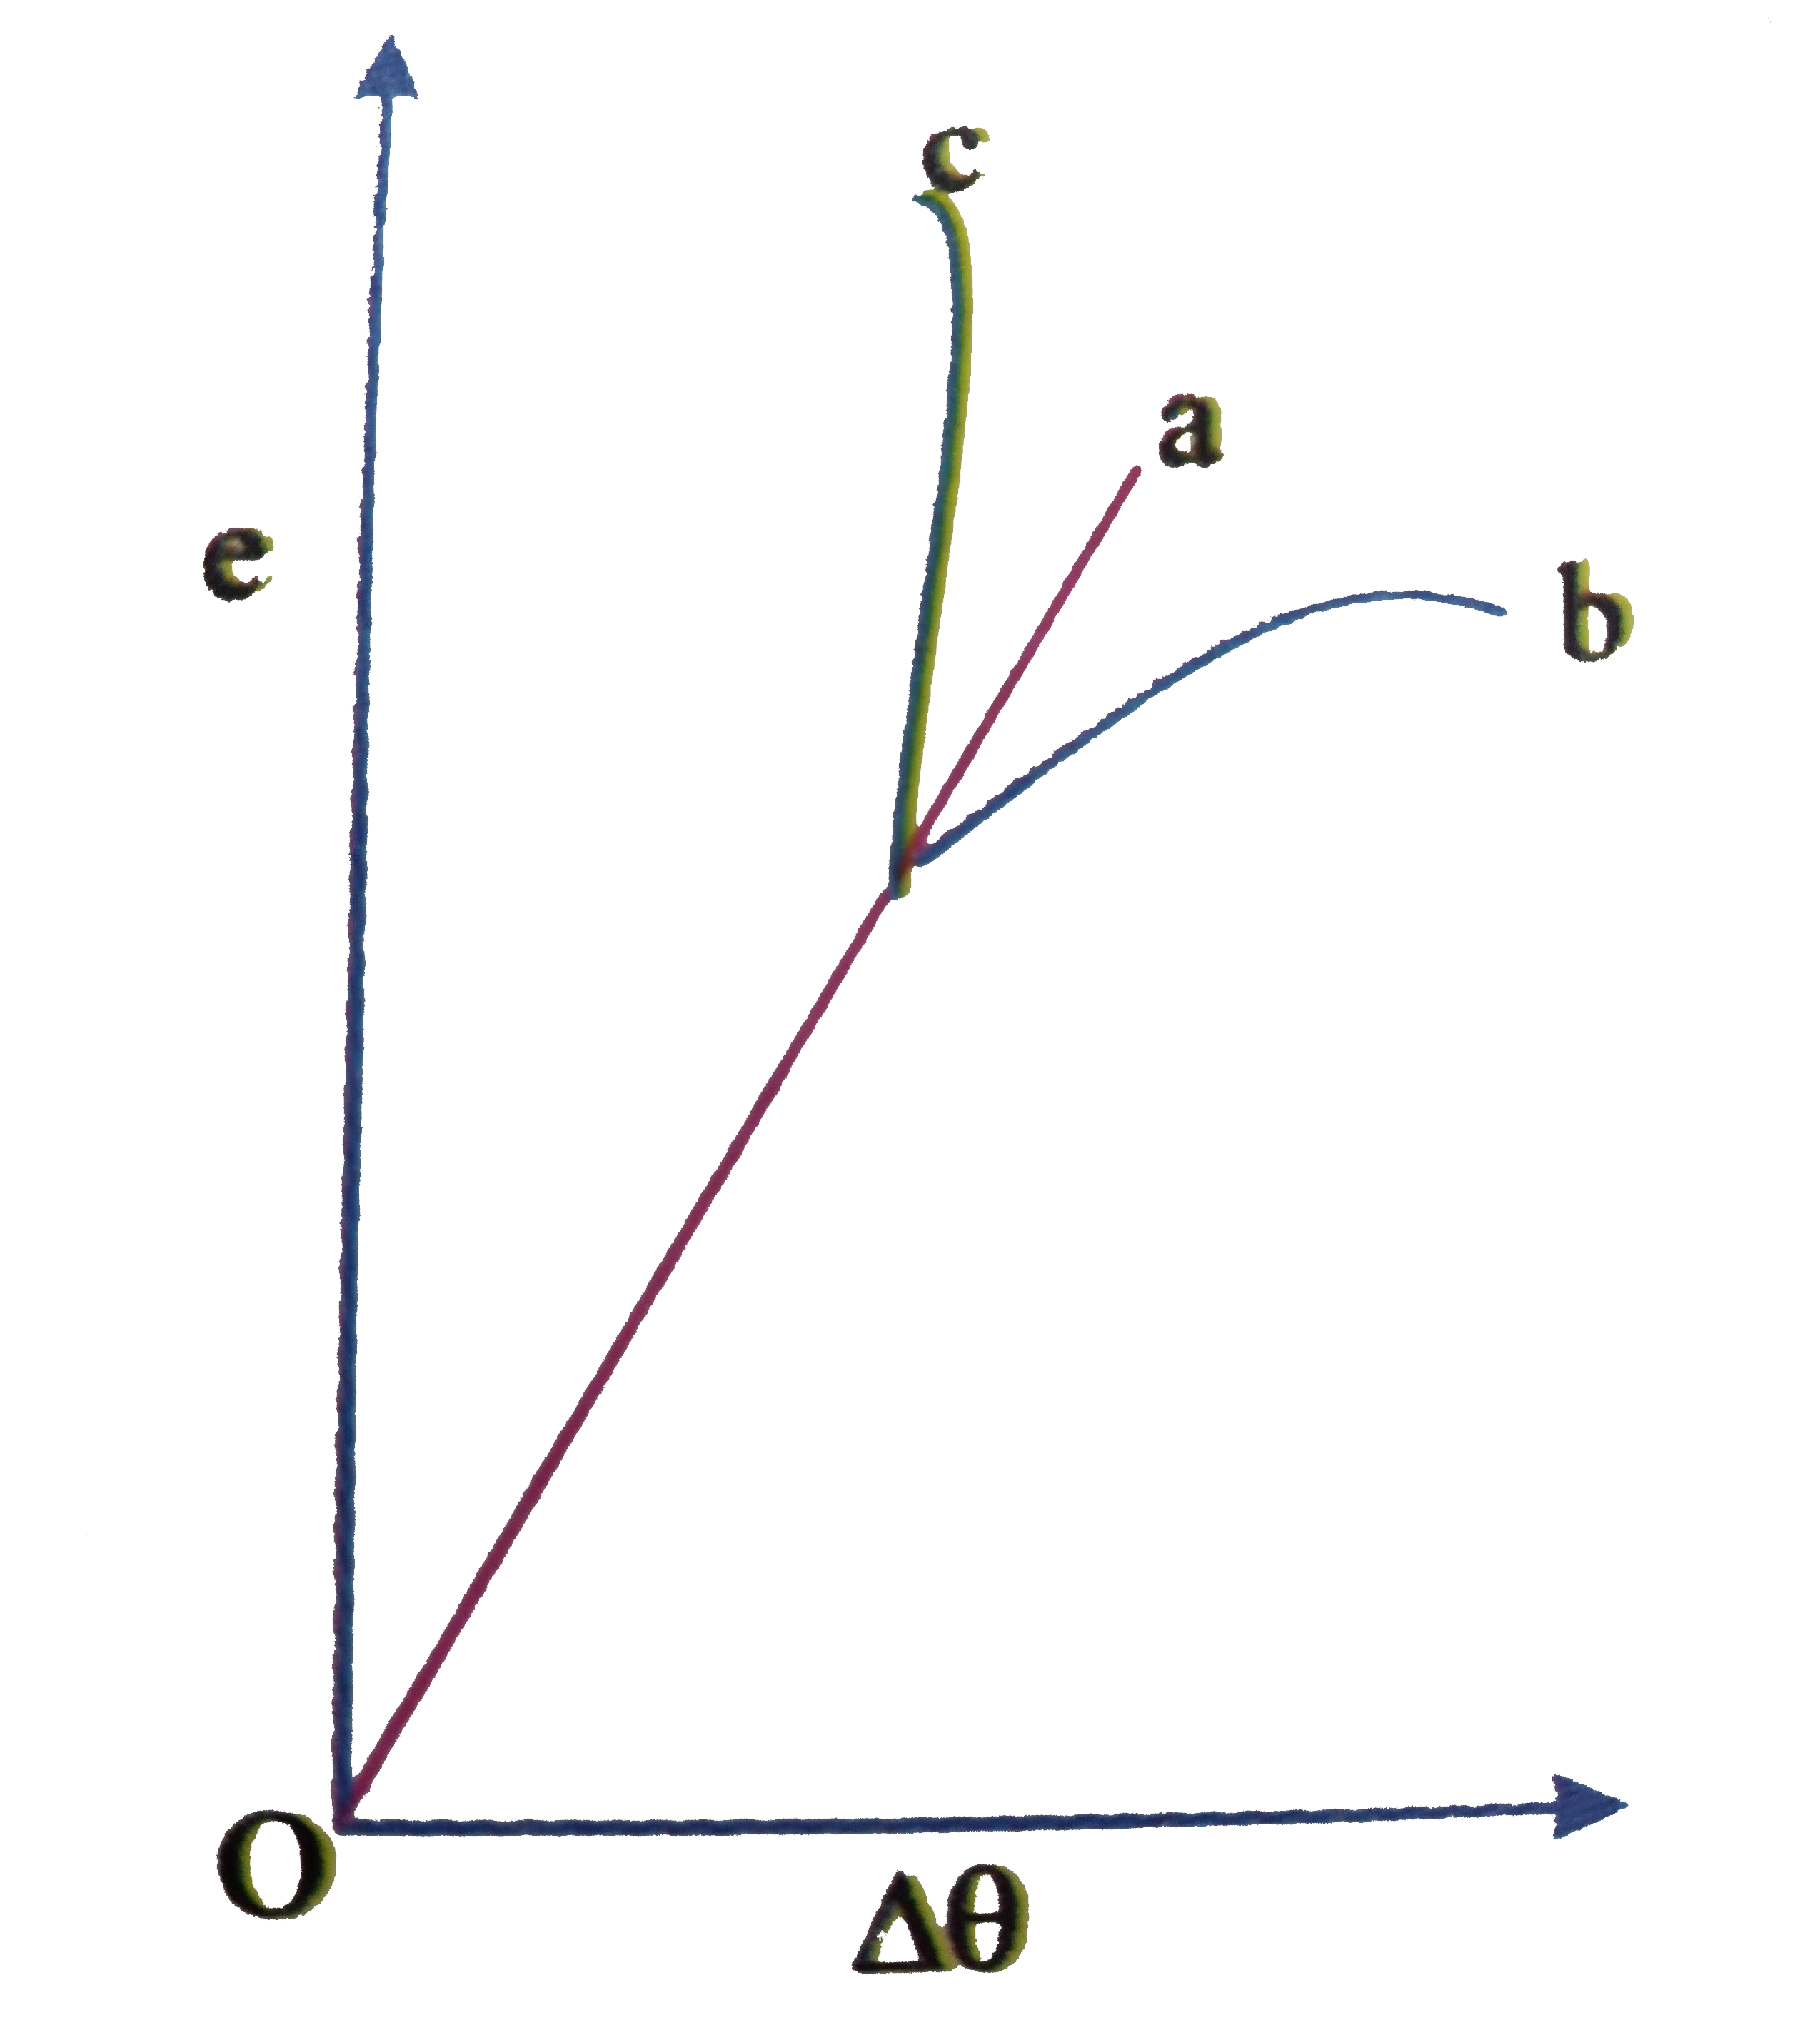 A unifrom rod is fixed at one end to a rigid  support, its temperture is gradually  increased the representaion of graph strain  (e) versus increment  in temperature Delta theta is